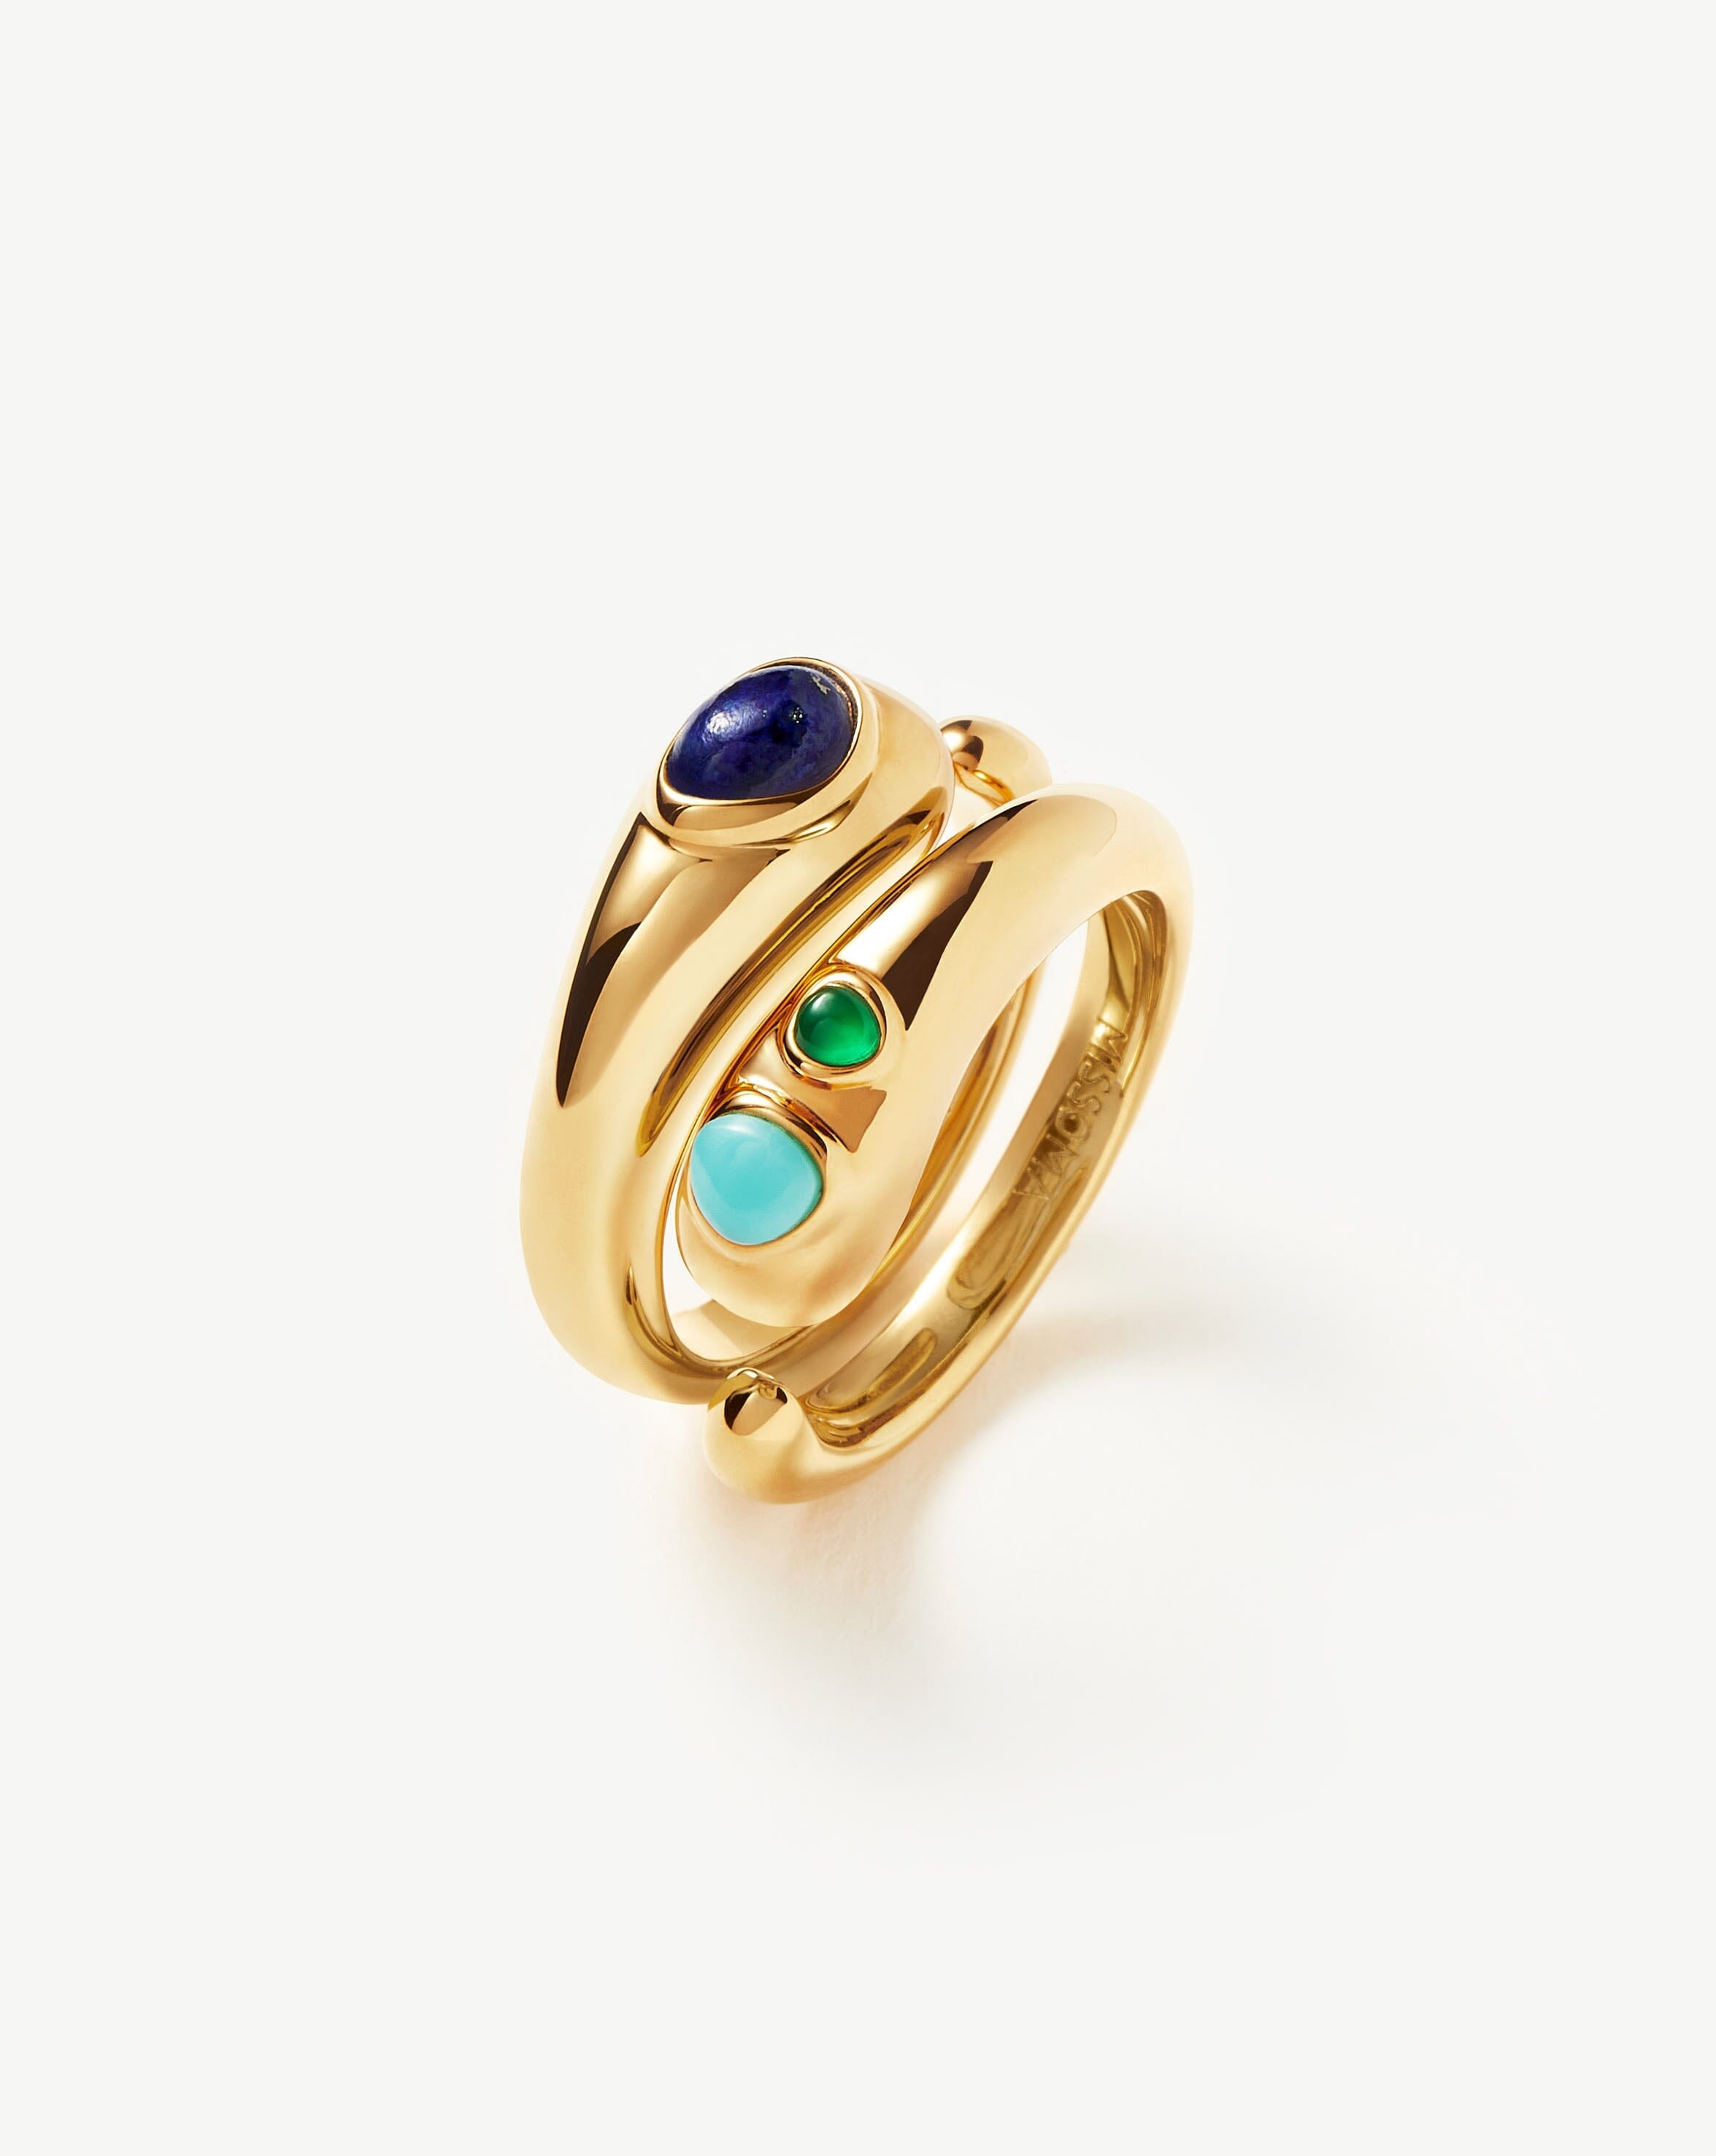 Molten Gemstone Double Stacking Ring Set | 18ct Gold Plated/Chalcedony & Turquoise & Lapis Rings Missoma 